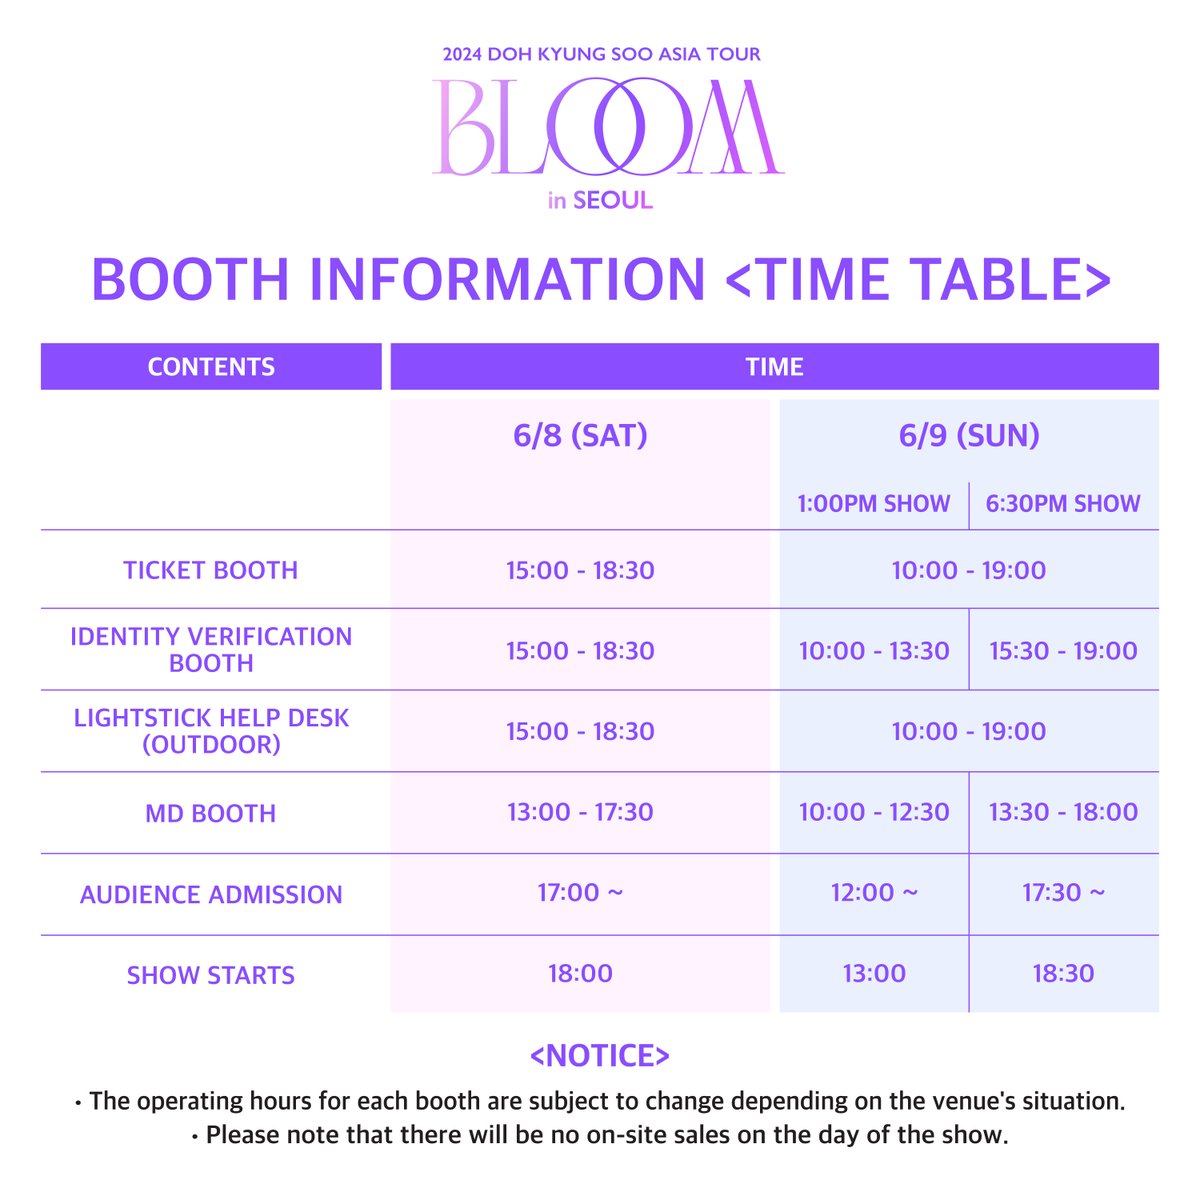 2024 DOH KYUNG SOO ASIA FAN CONCERT TOUR BLOOM in SEOUL 부스 운영 안내 <타임테이블> BOOTH INFORMATION <TIME TABLE> #도경수 #DOHKYUNGSOO #FANCONCERT_BLOOM